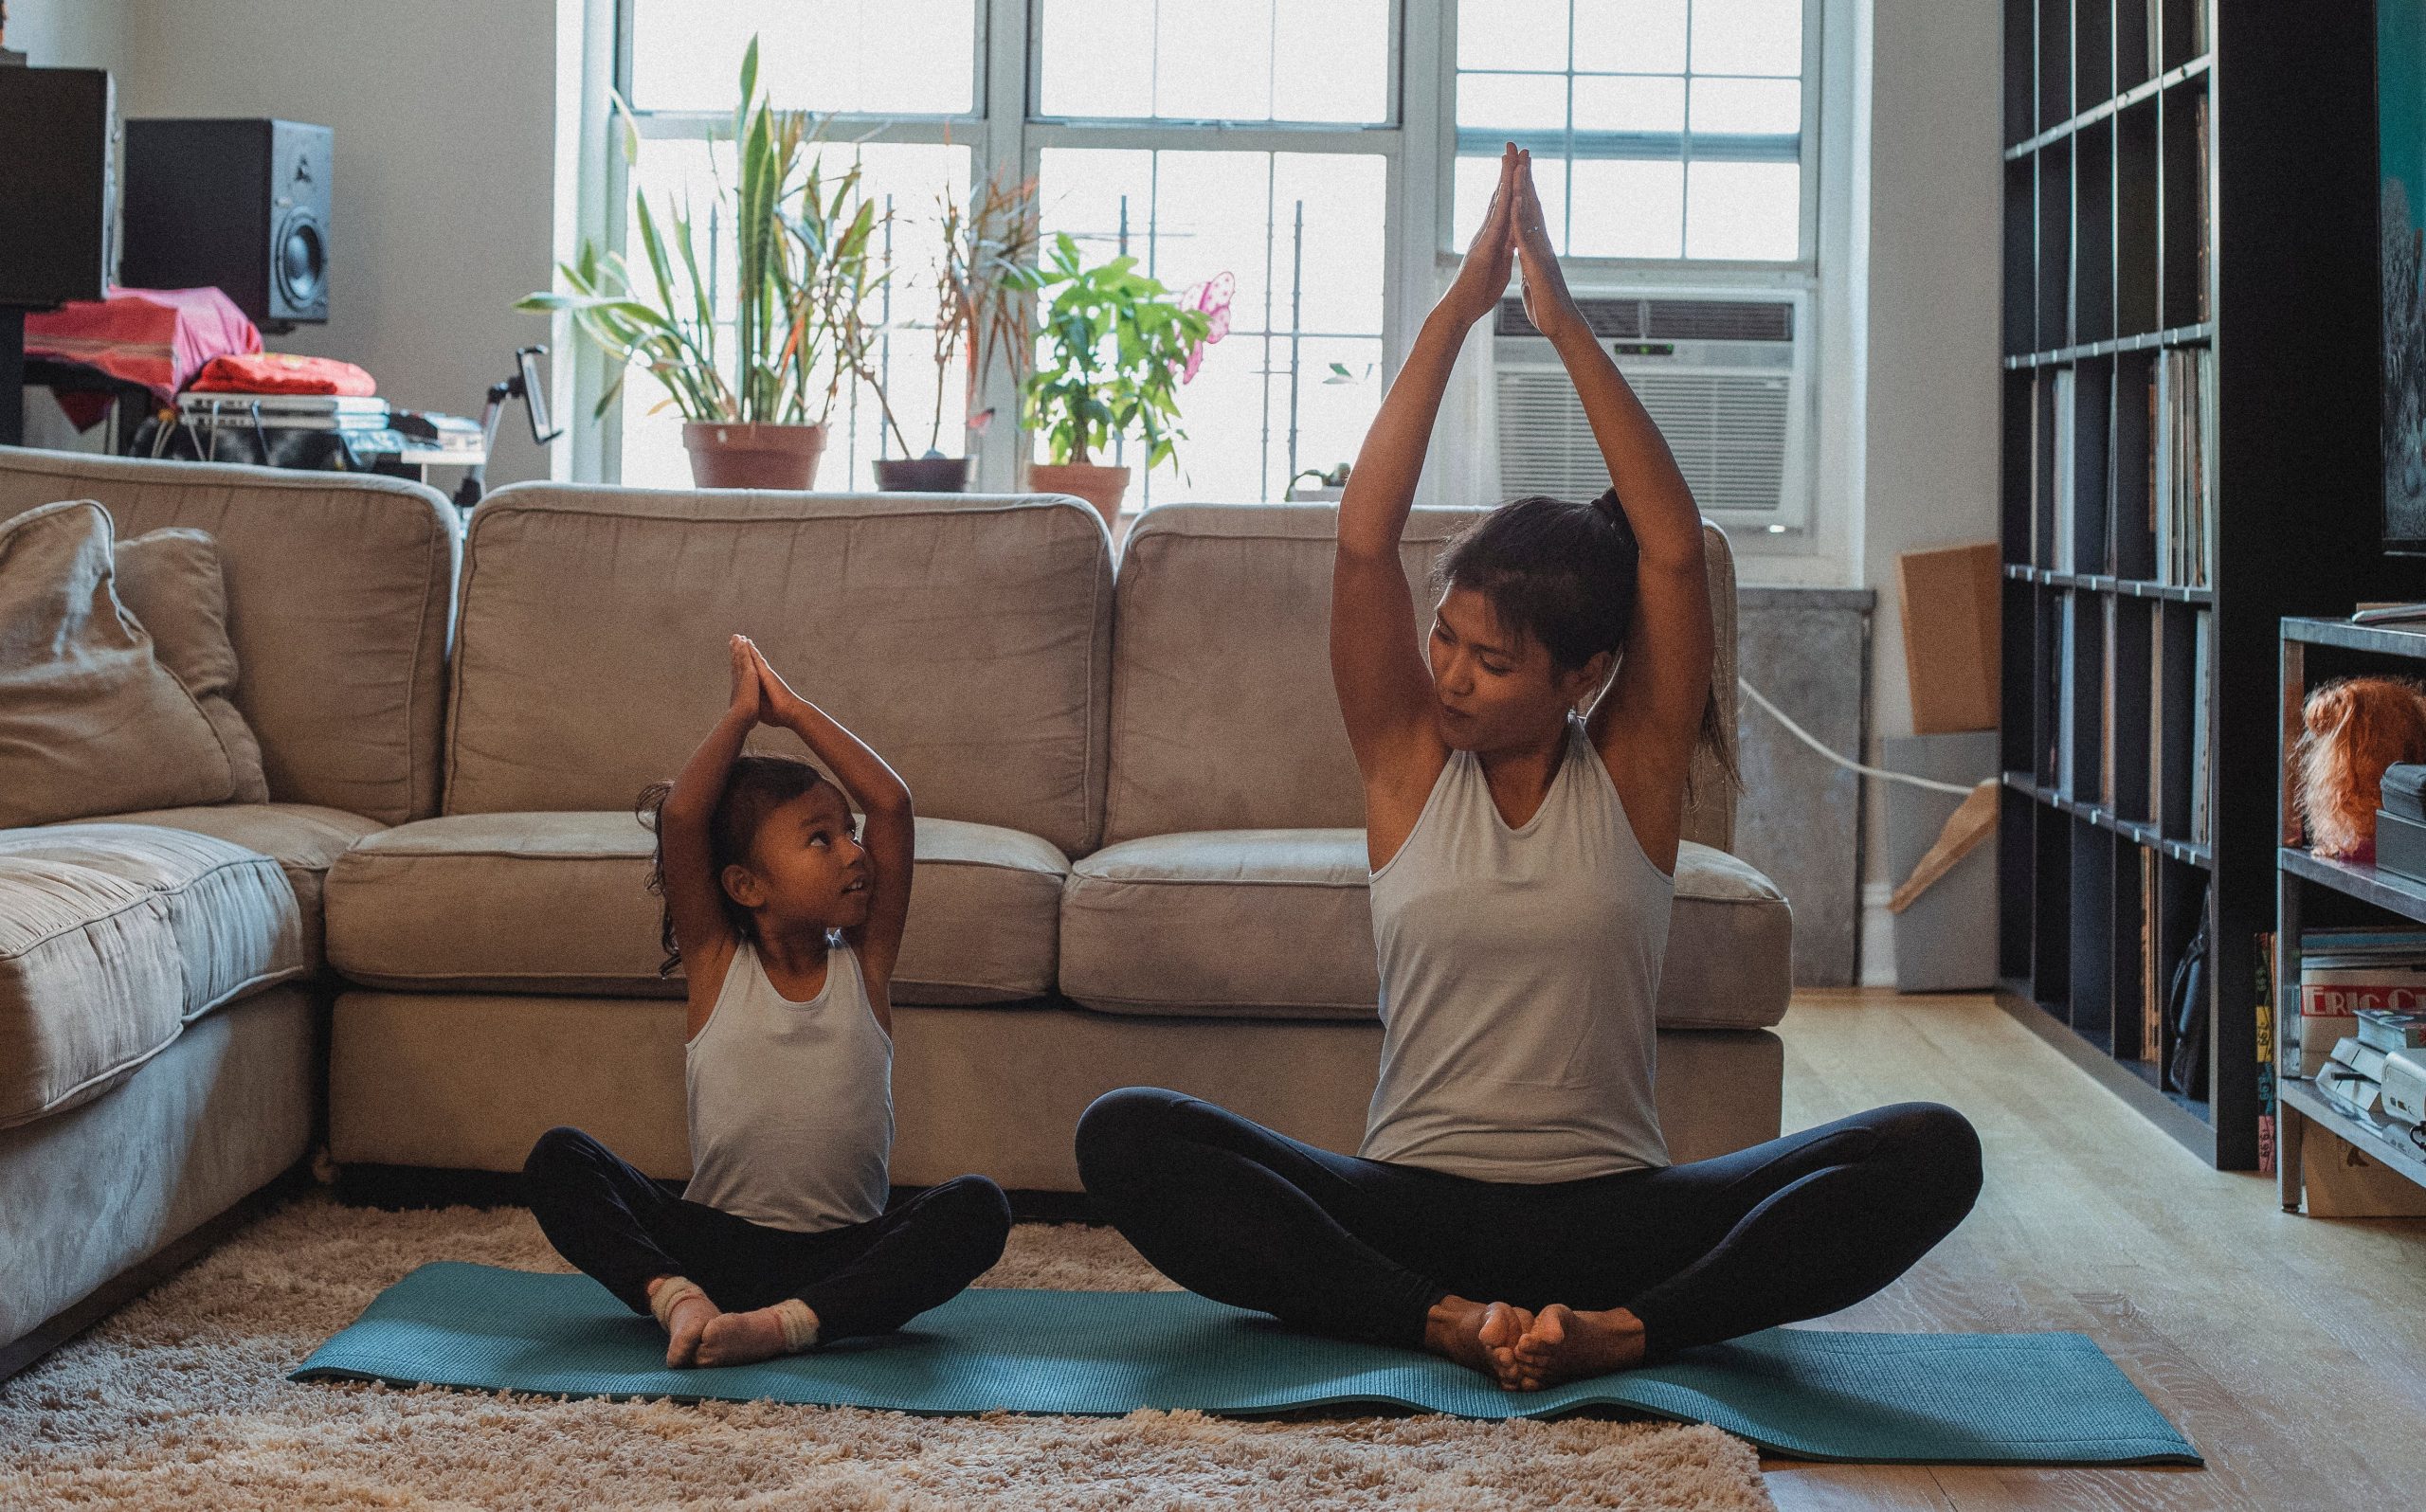 Adult and child practicing yoga together with hands clasped overhead in a bright, cluttered living room. 